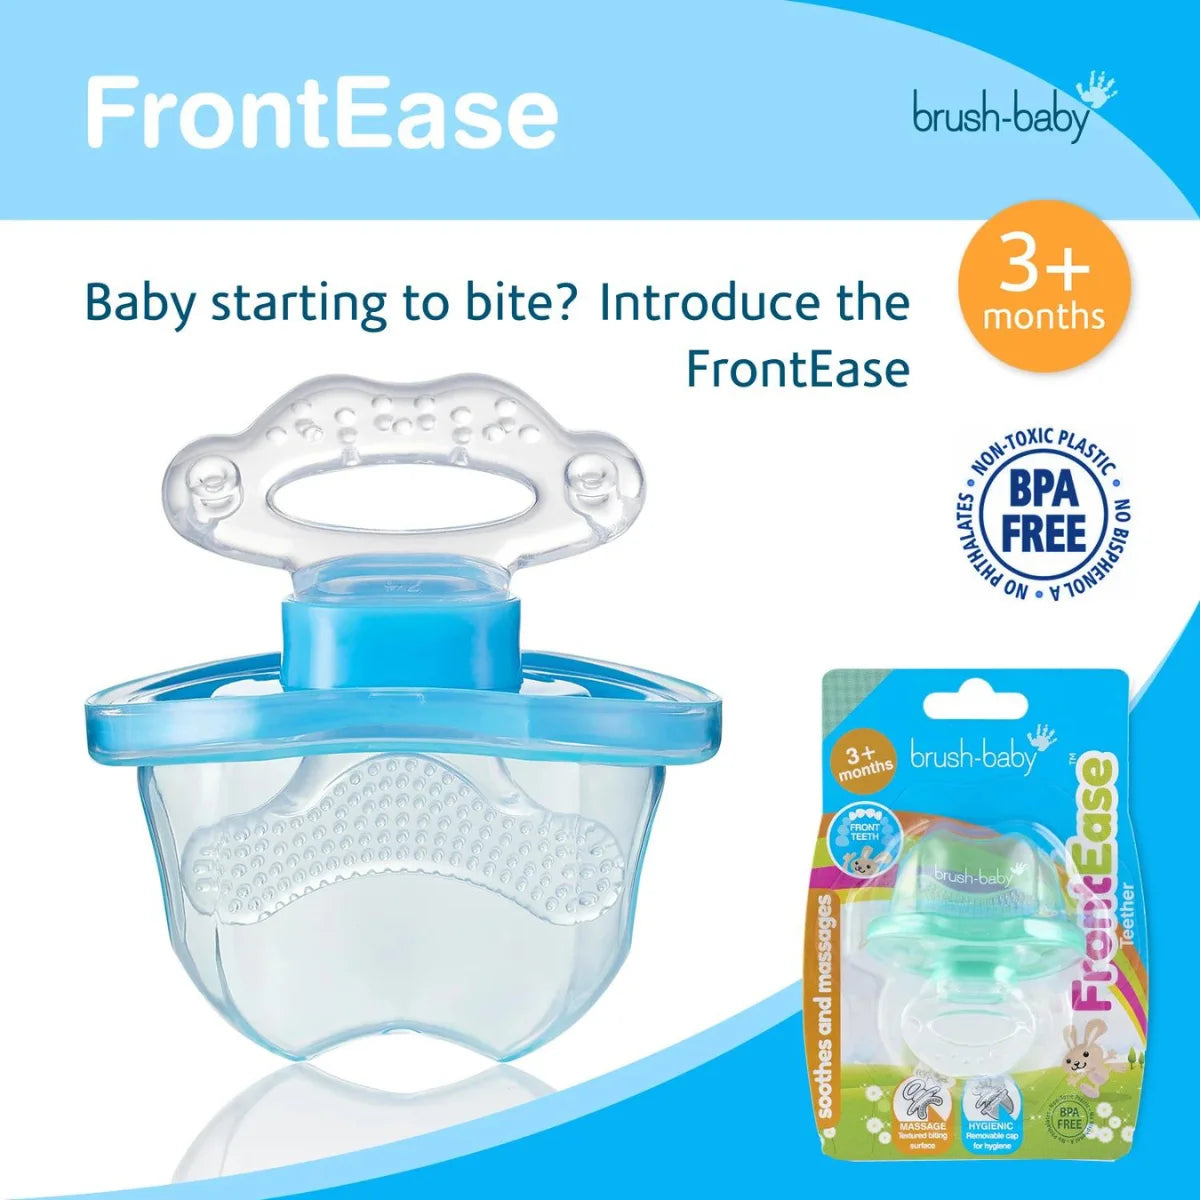 frontease teether for teething remedies for babies 